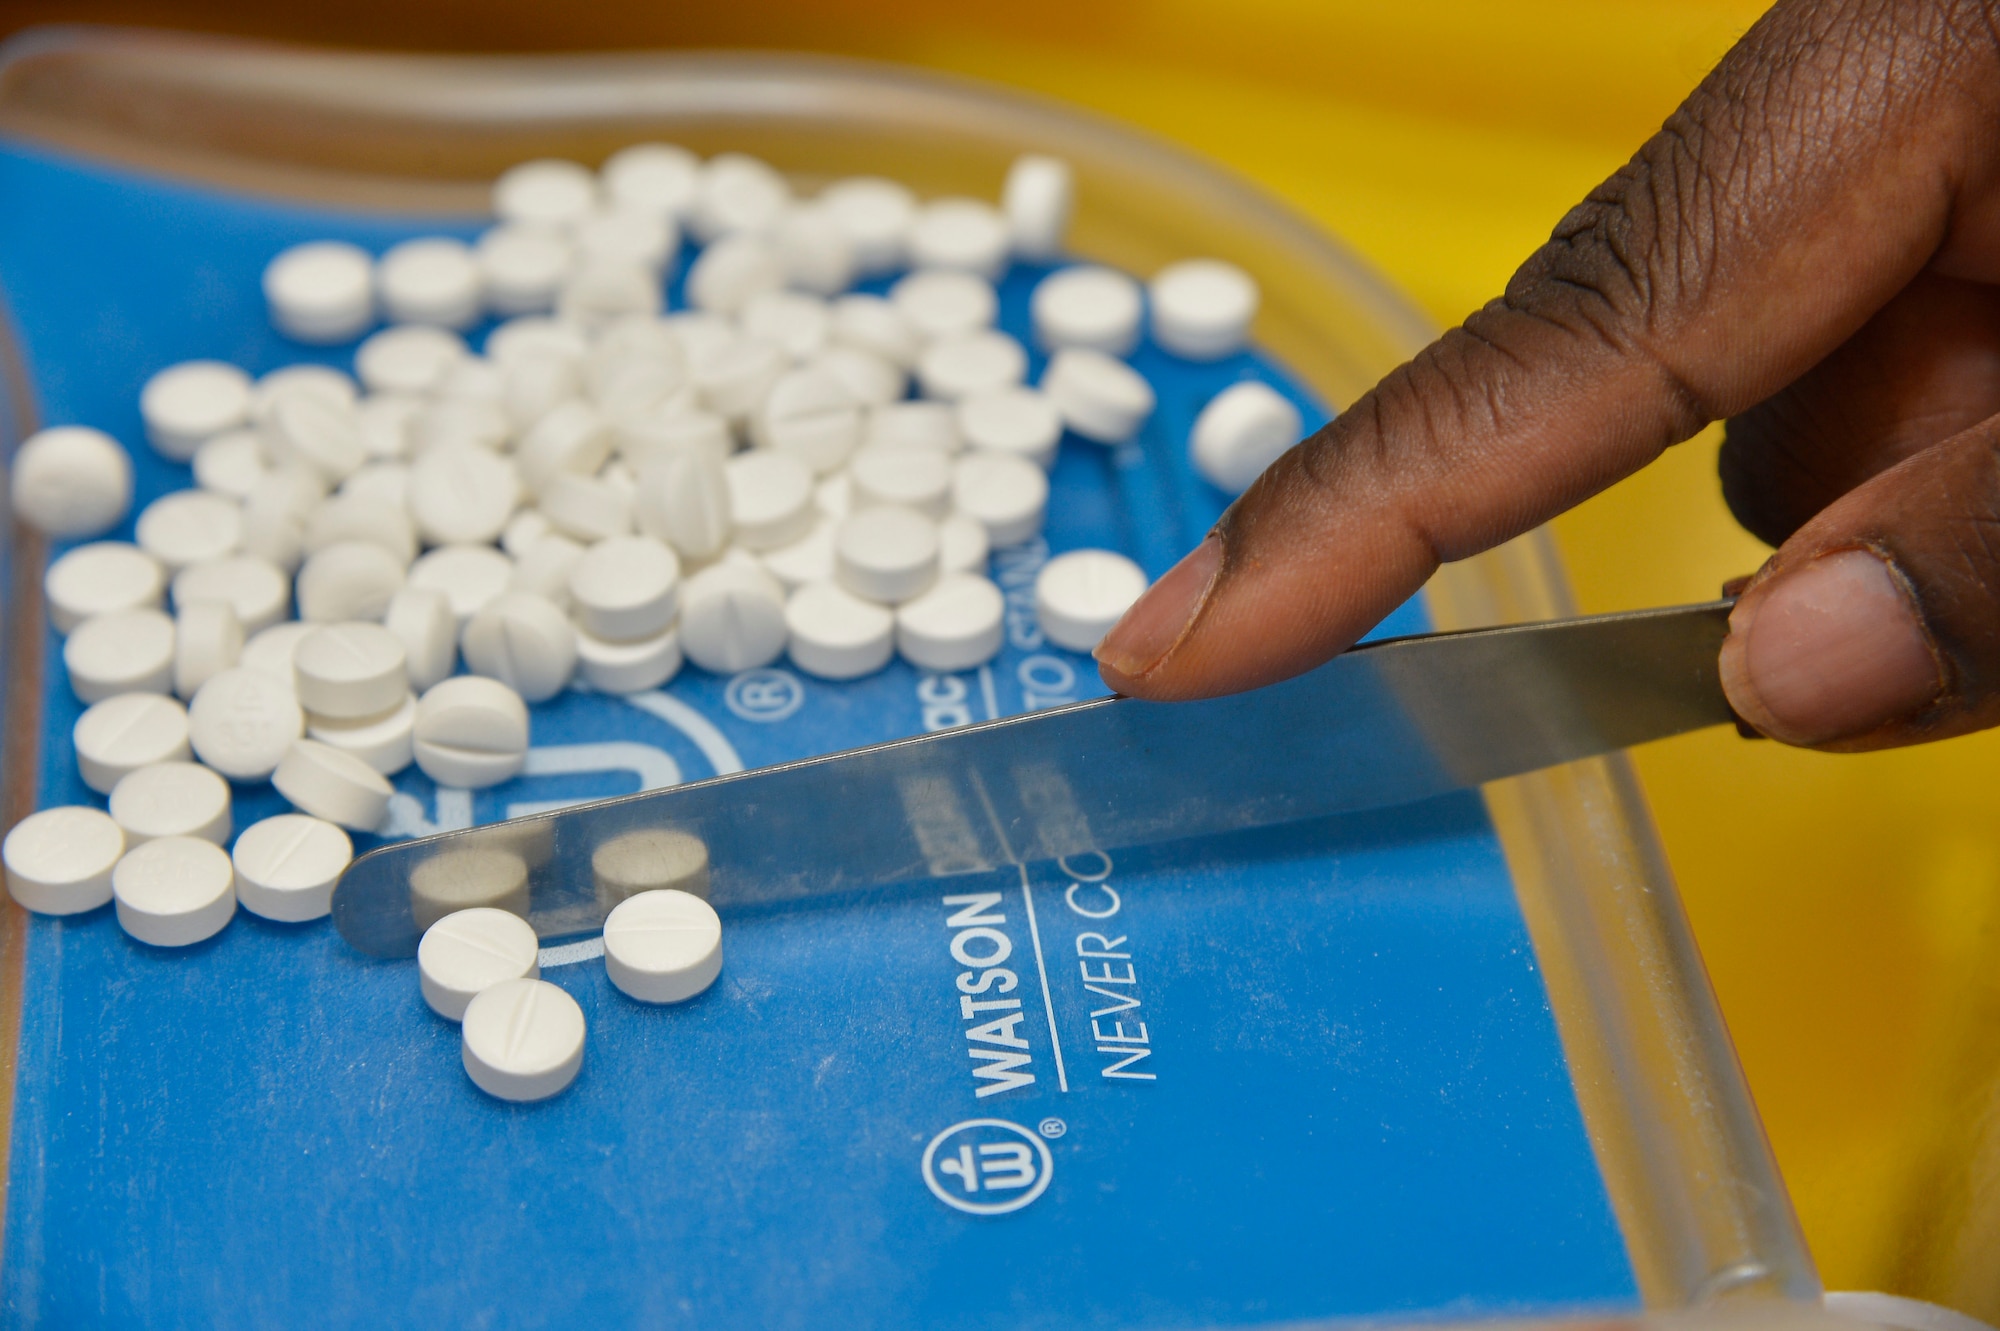 Jessica Riley, 6th Medical Support Squadron pharmacy technician, counts pills for a prescription refill at the PharmaCARE Center on MacDill Air Force Base, Fla., July 29, 2015. The PharmaCARE Center provides outpatient pharmaceutical care to all beneficiary categories at MacDill. (U.S. Air Force photo by Staff Sgt. Shandresha Mitchell/Released)